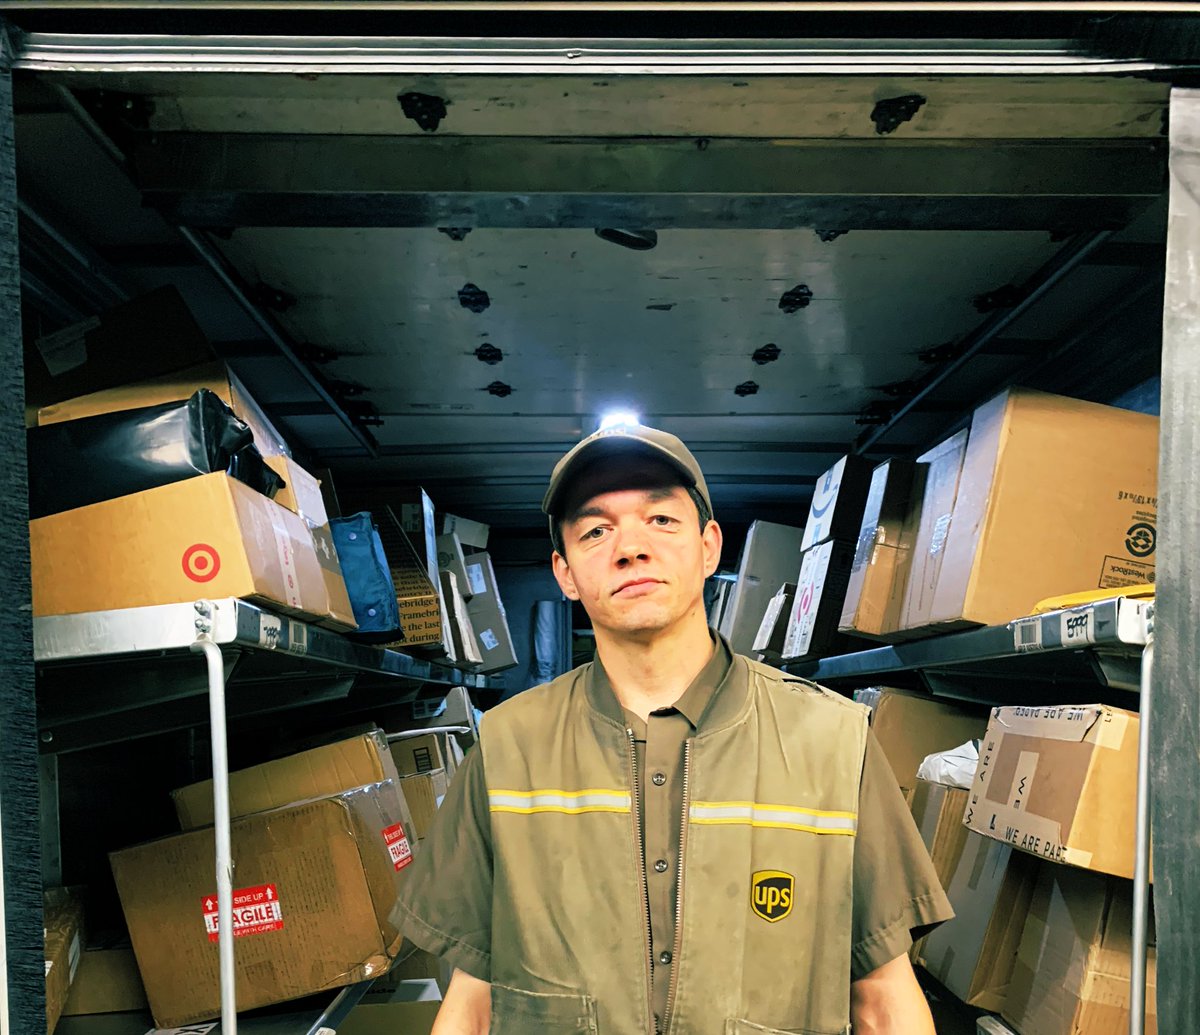 Very proud of Seattle South’s very own Jacob Faust. Like most- we’ve had our share of challenges this year- Very honored that a customer shared thanks for Jacob’s friendly, skilled, and dedicated service- thank you Jacob 🙌🏼 @NorthwestUPSers @Joseph_Braham